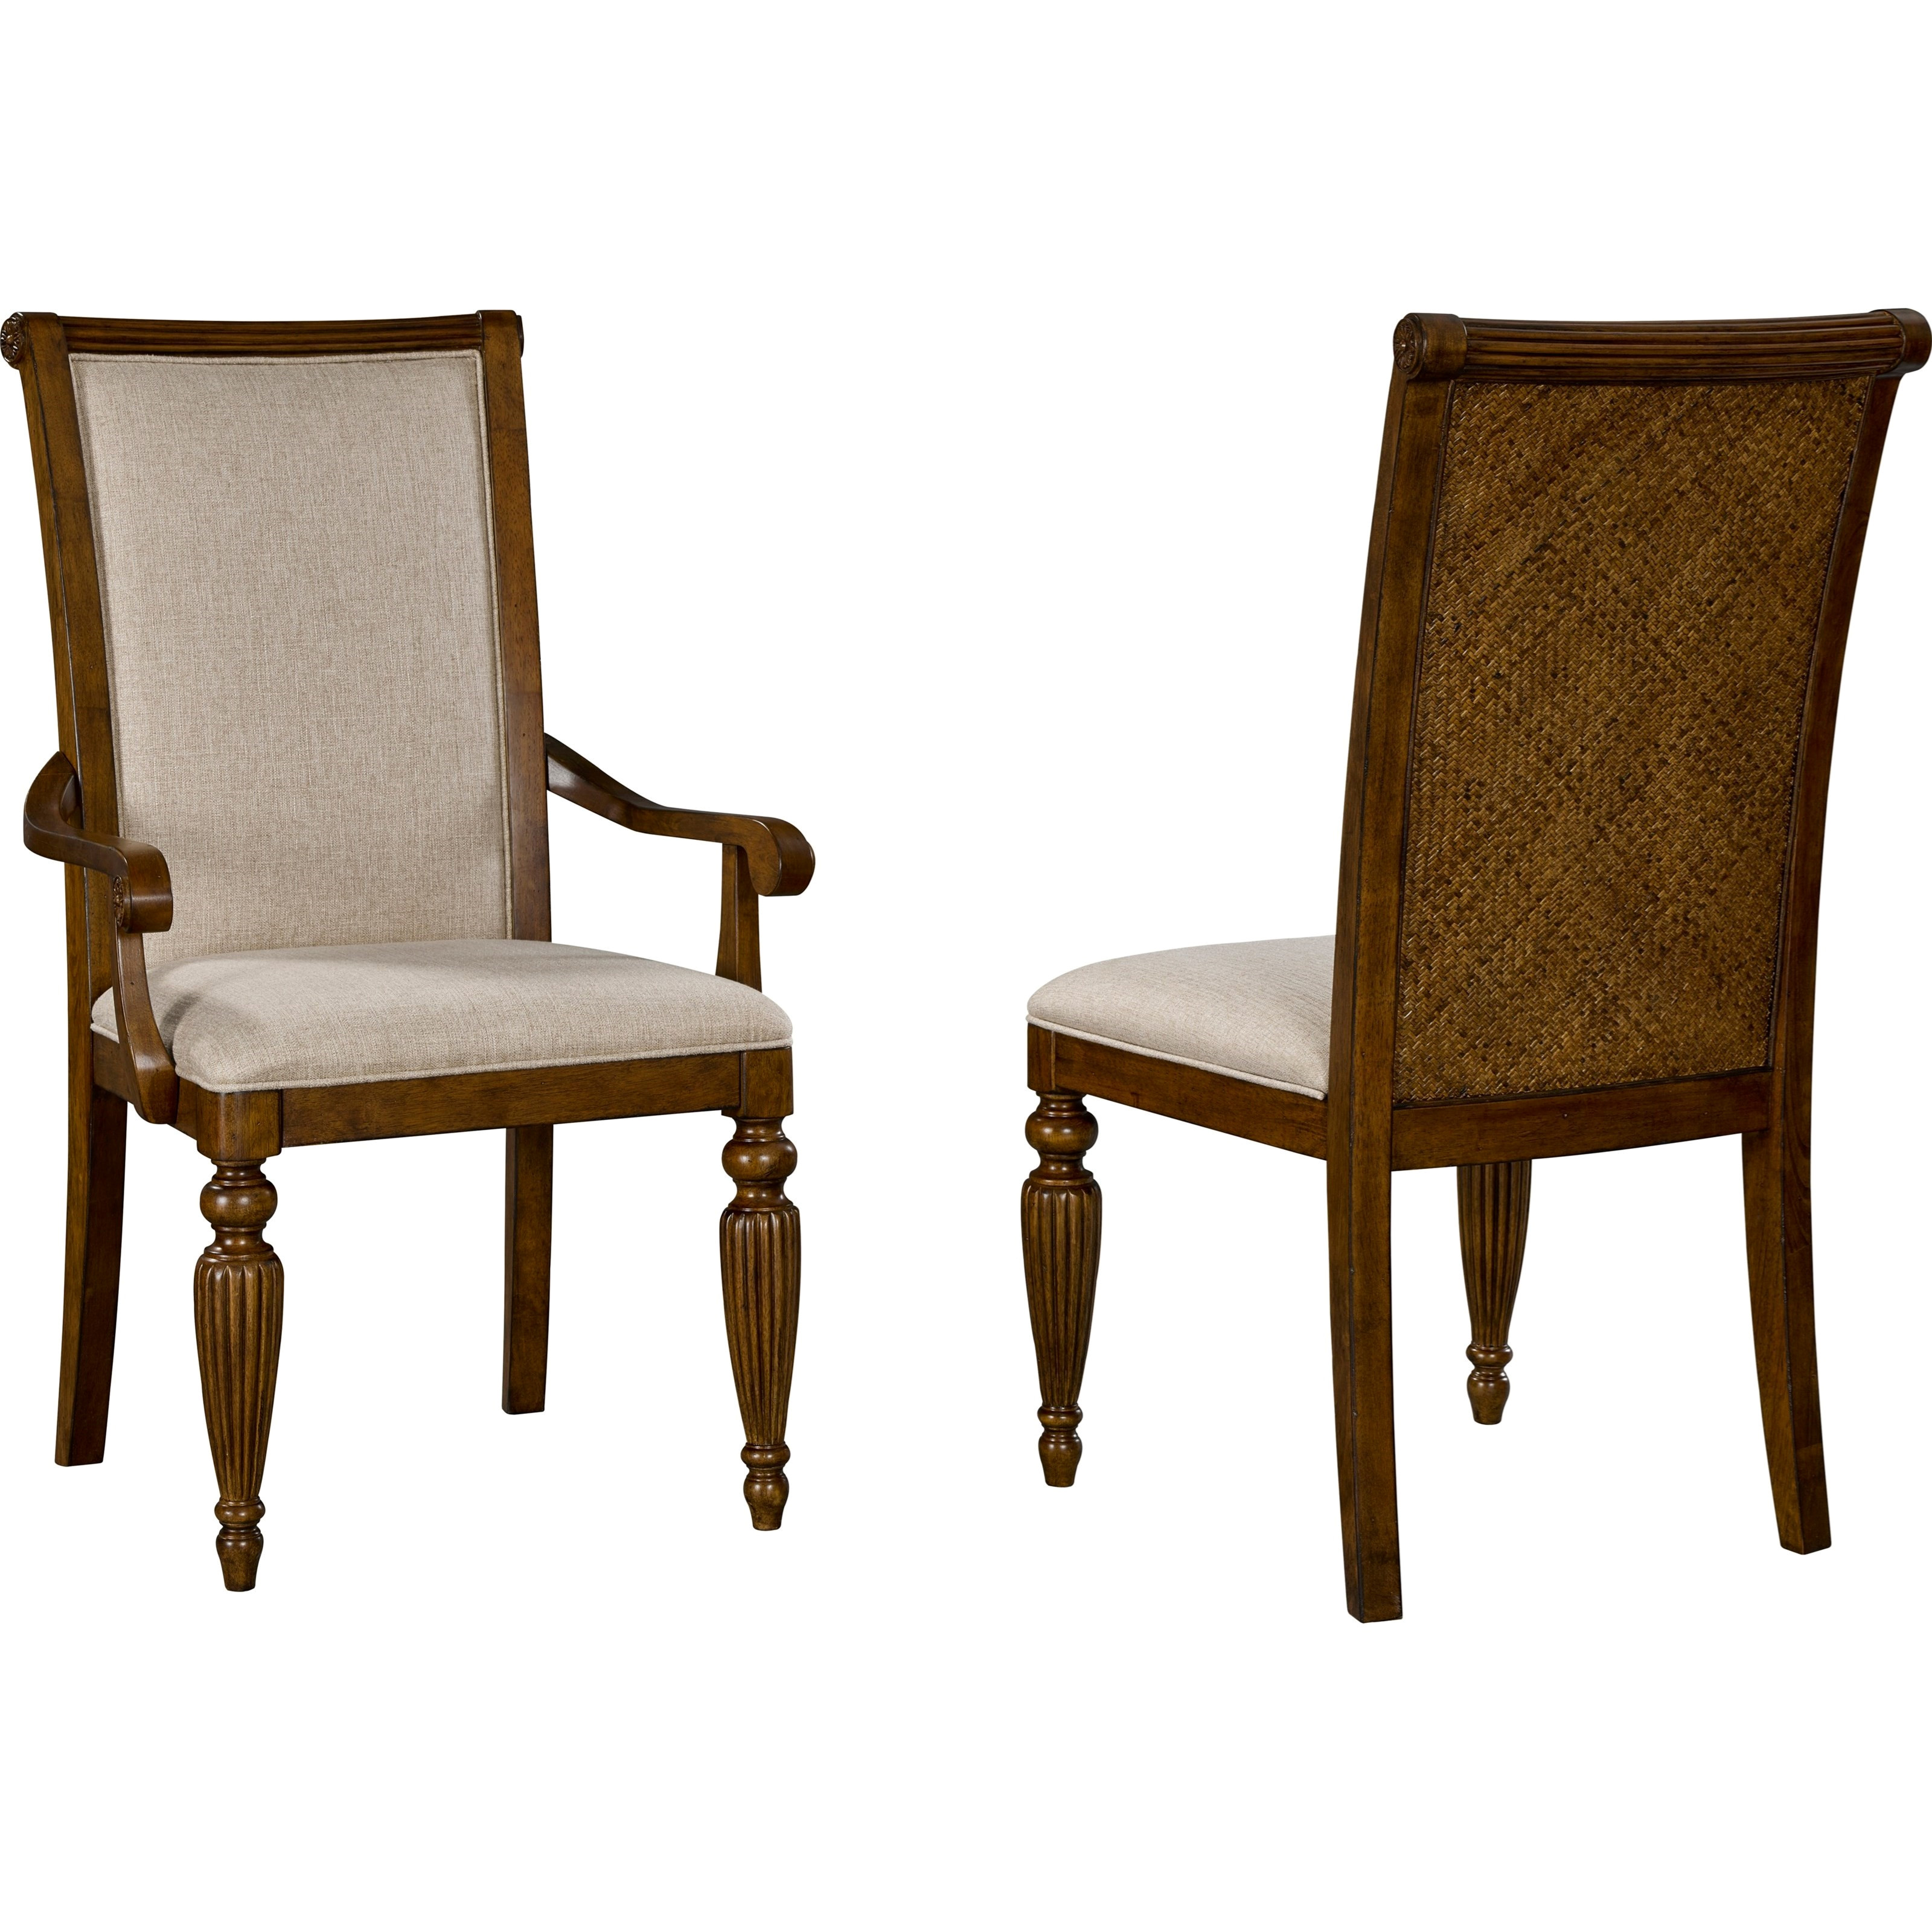 elegant baers dining room sets gallery pracmatic broyhill furniture bay tro piece table and chair set with padded raffia accents accent pieces for amazing espresso white lift top